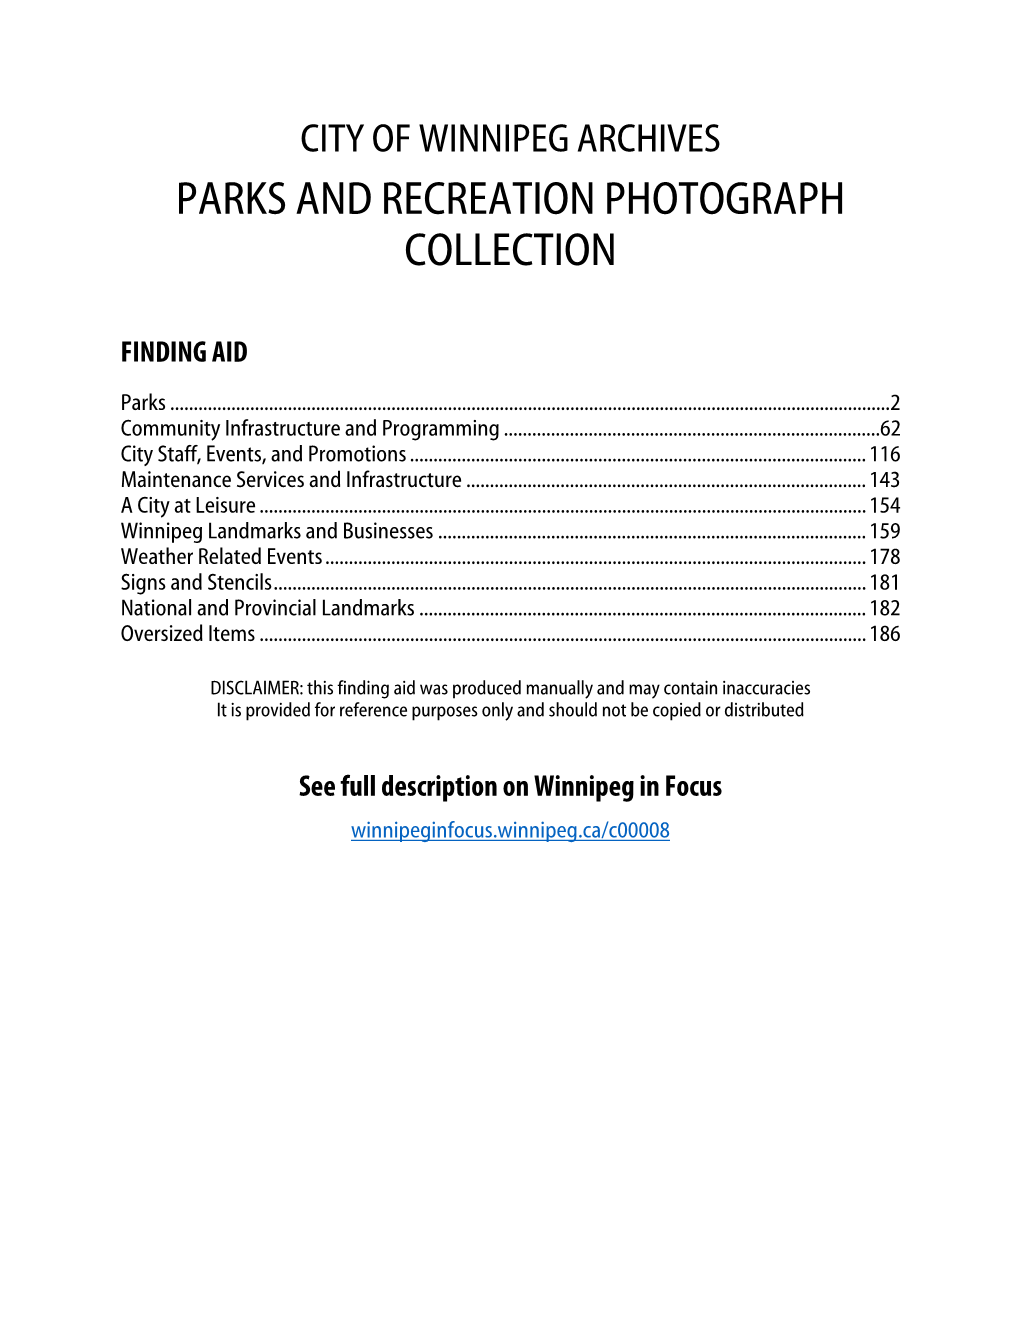 Parks and Recreation Photograph Collection